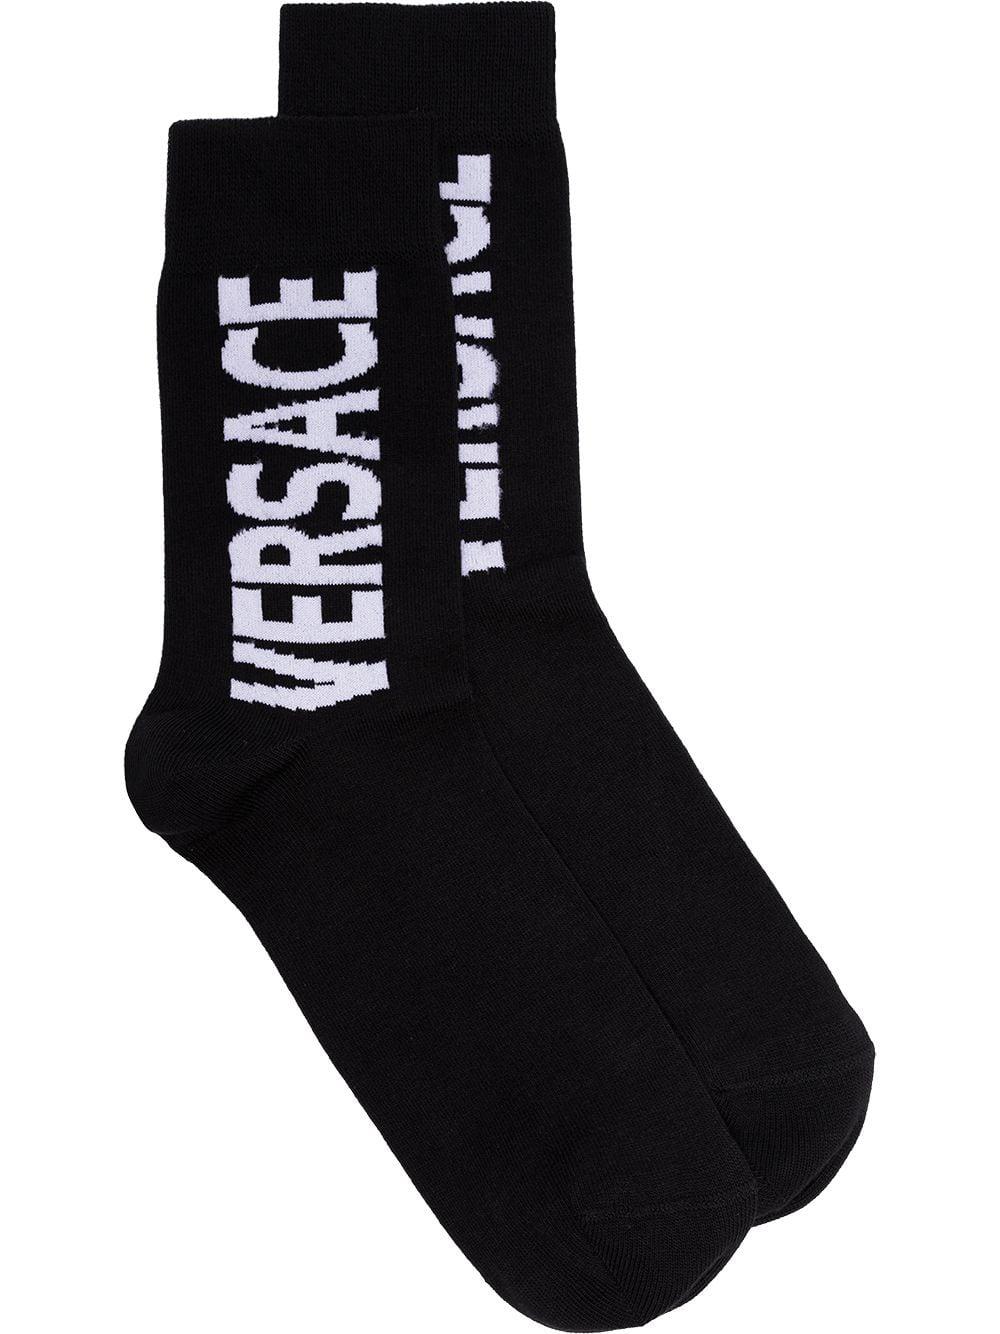 Versace Cotton Socks With Embroidery in Black for Men - Lyst